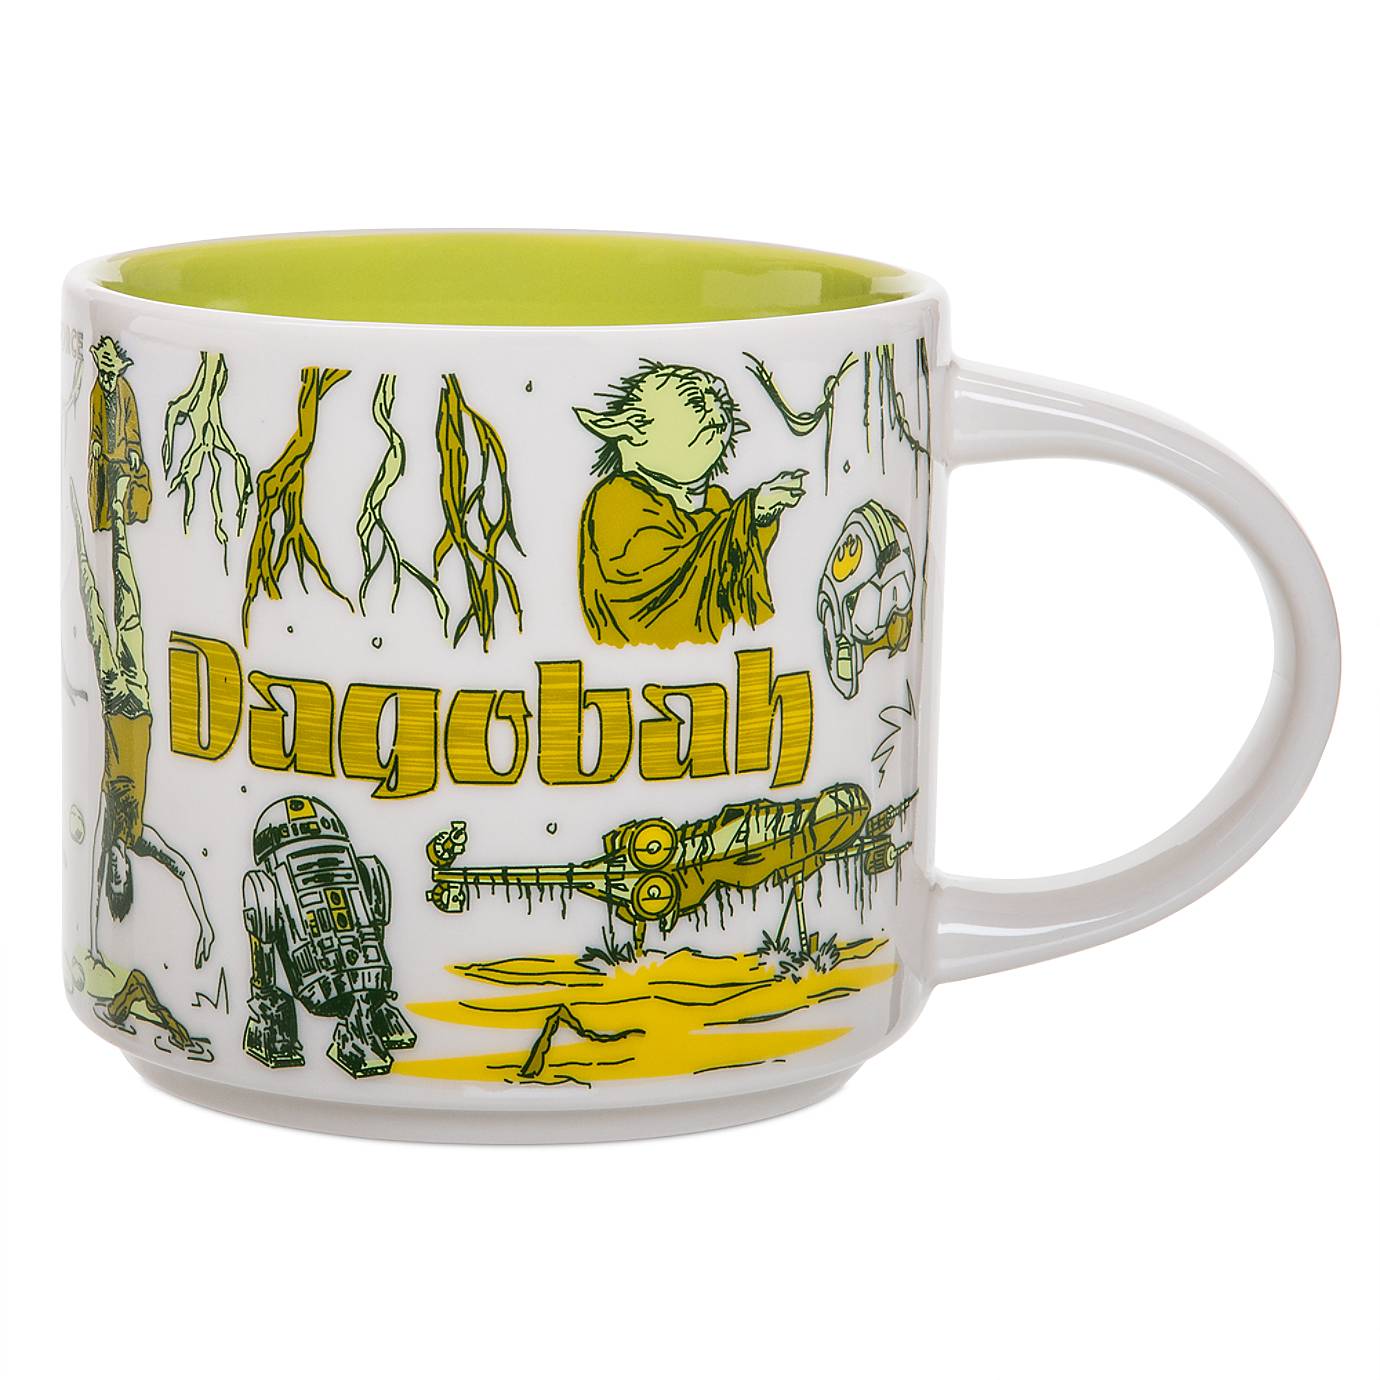 These Star Wars Starbucks Mugs Are Available Online Again!